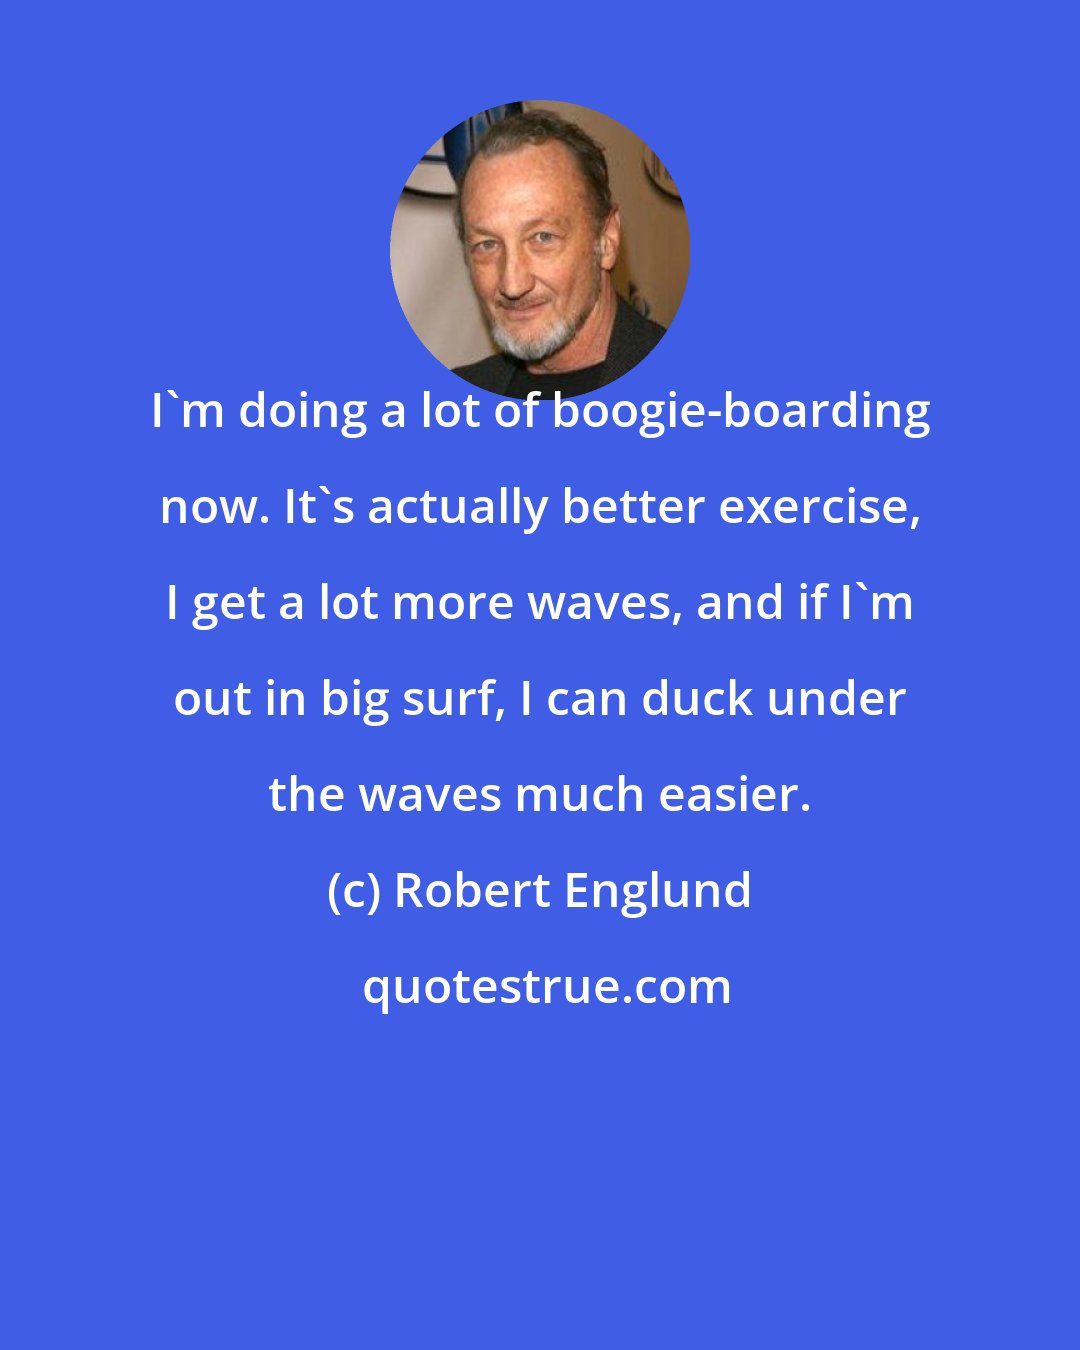 Robert Englund: I'm doing a lot of boogie-boarding now. It's actually better exercise, I get a lot more waves, and if I'm out in big surf, I can duck under the waves much easier.